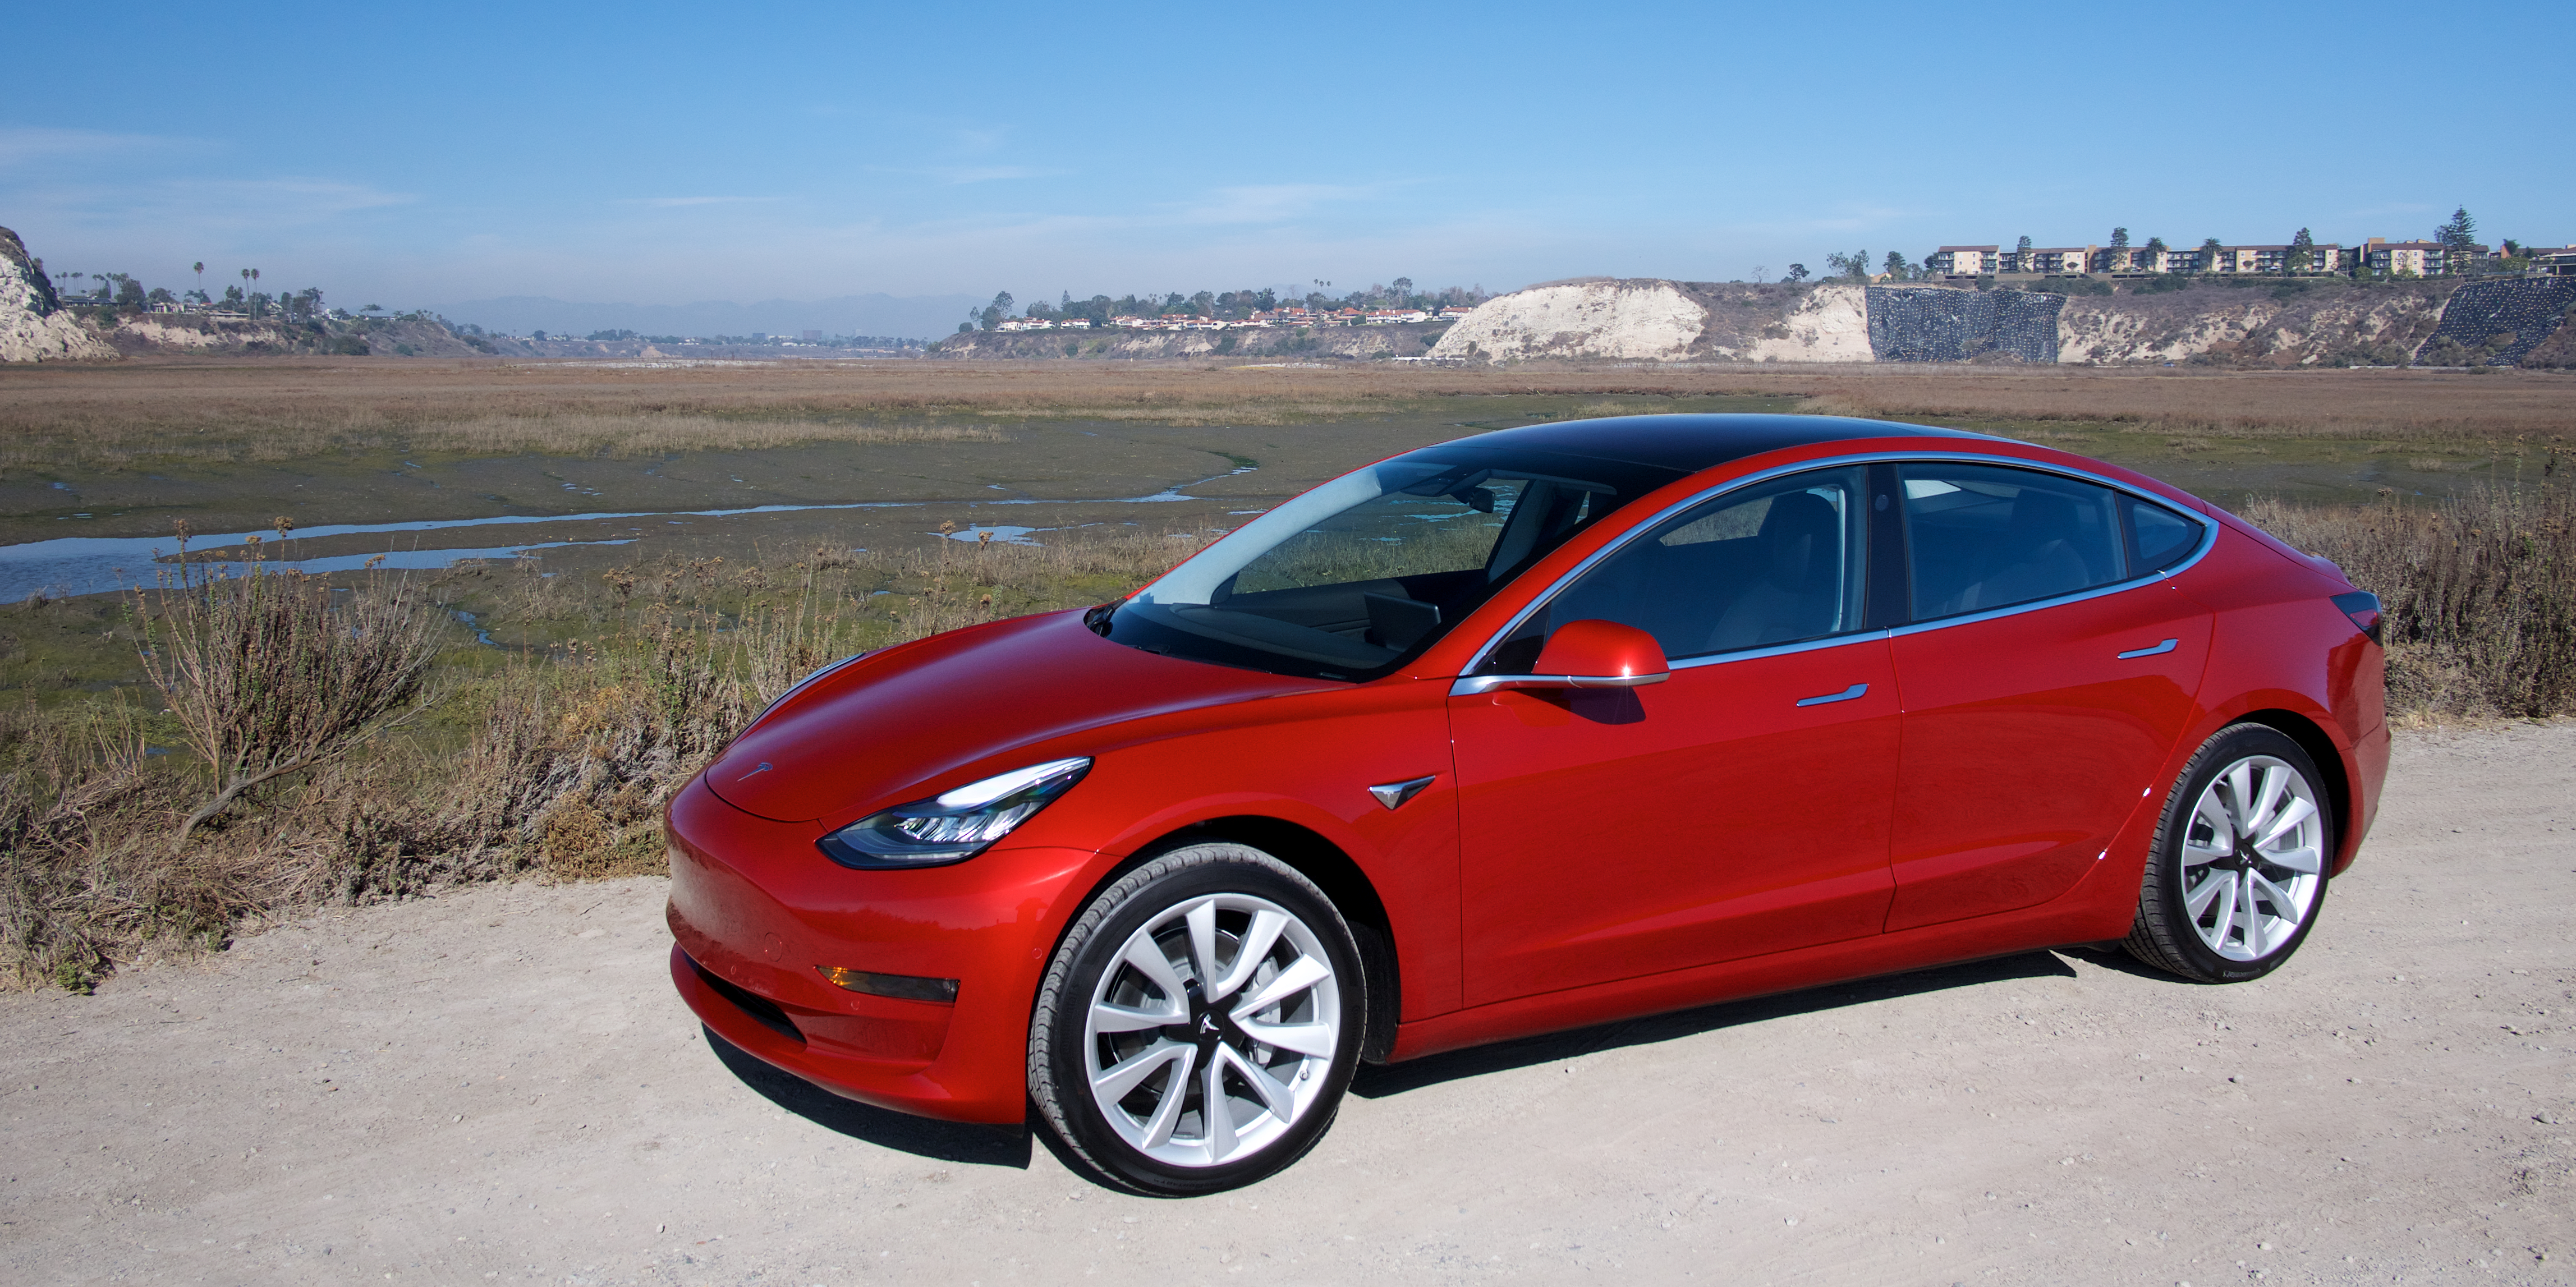 Tesla Model 3 - Your questions answered